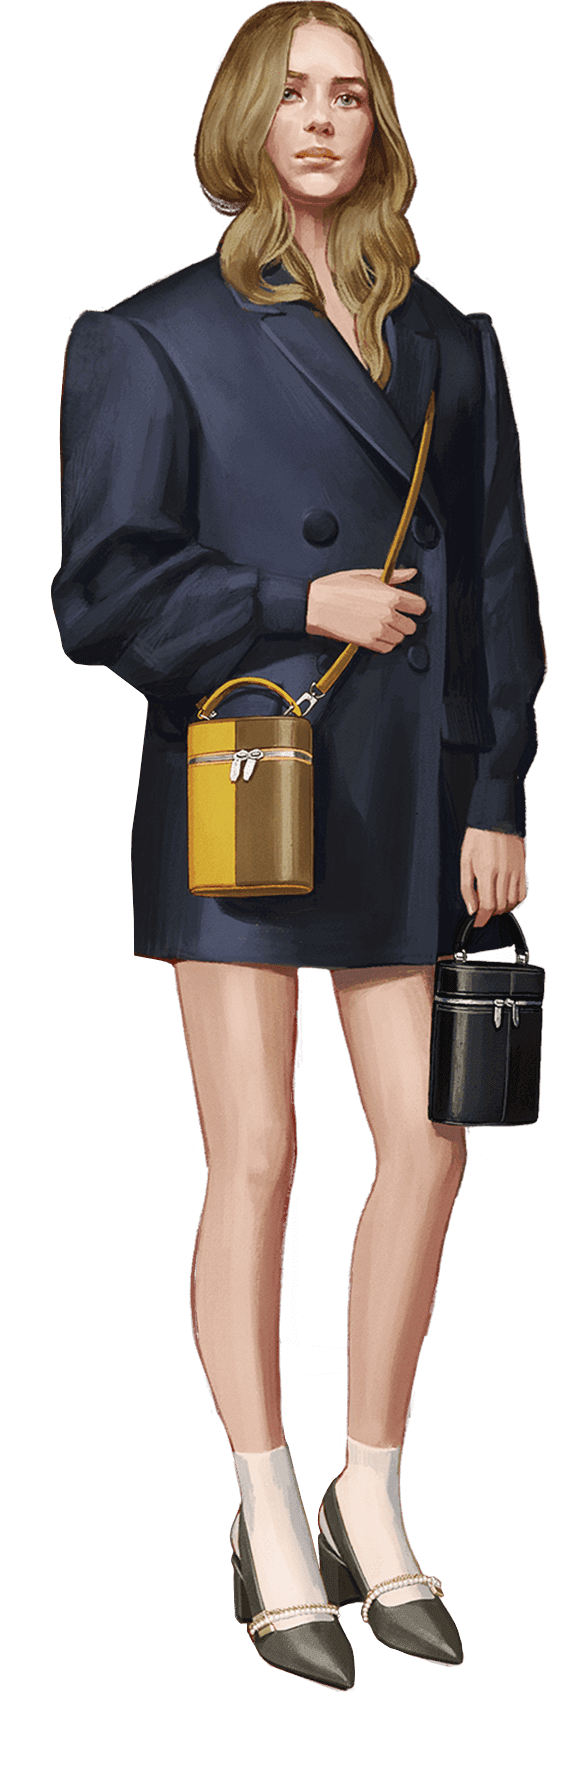 A compilation of illustrations from the CHARLES & KEITH Fall Winter 2020 campaign - CHARLES & KEITH - Model 2